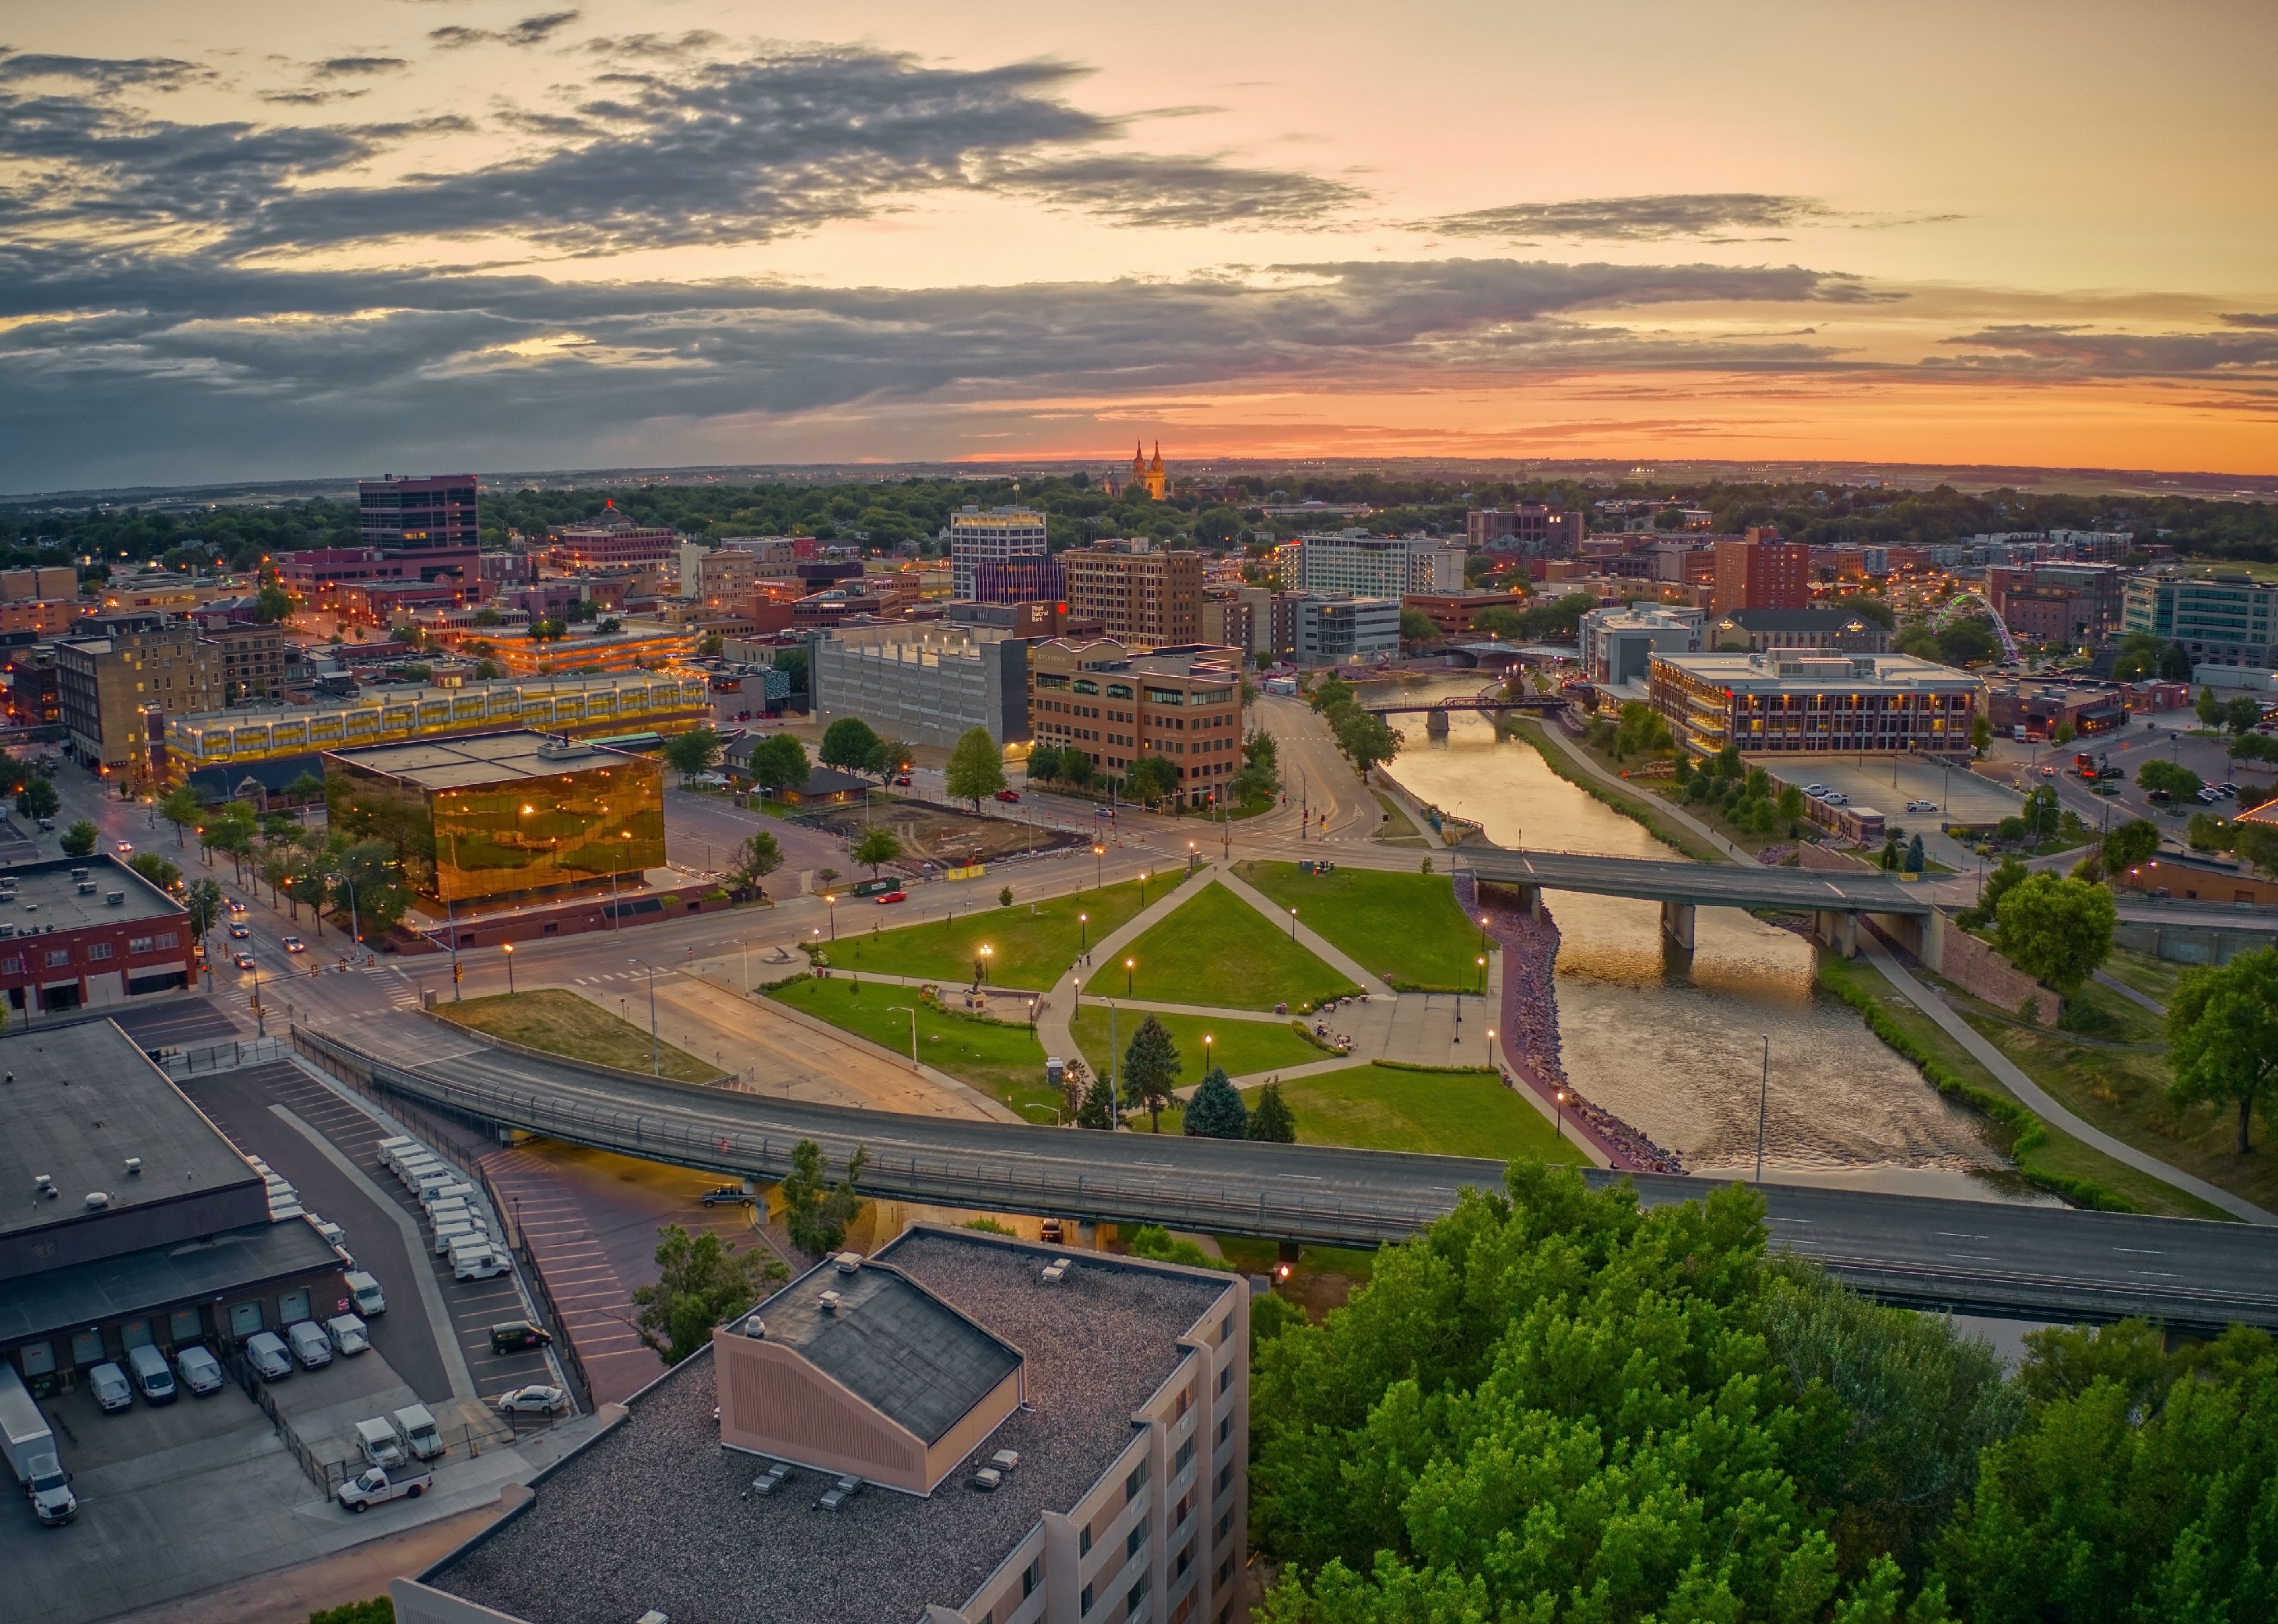 Aerial view of Sioux Falls at sunset.